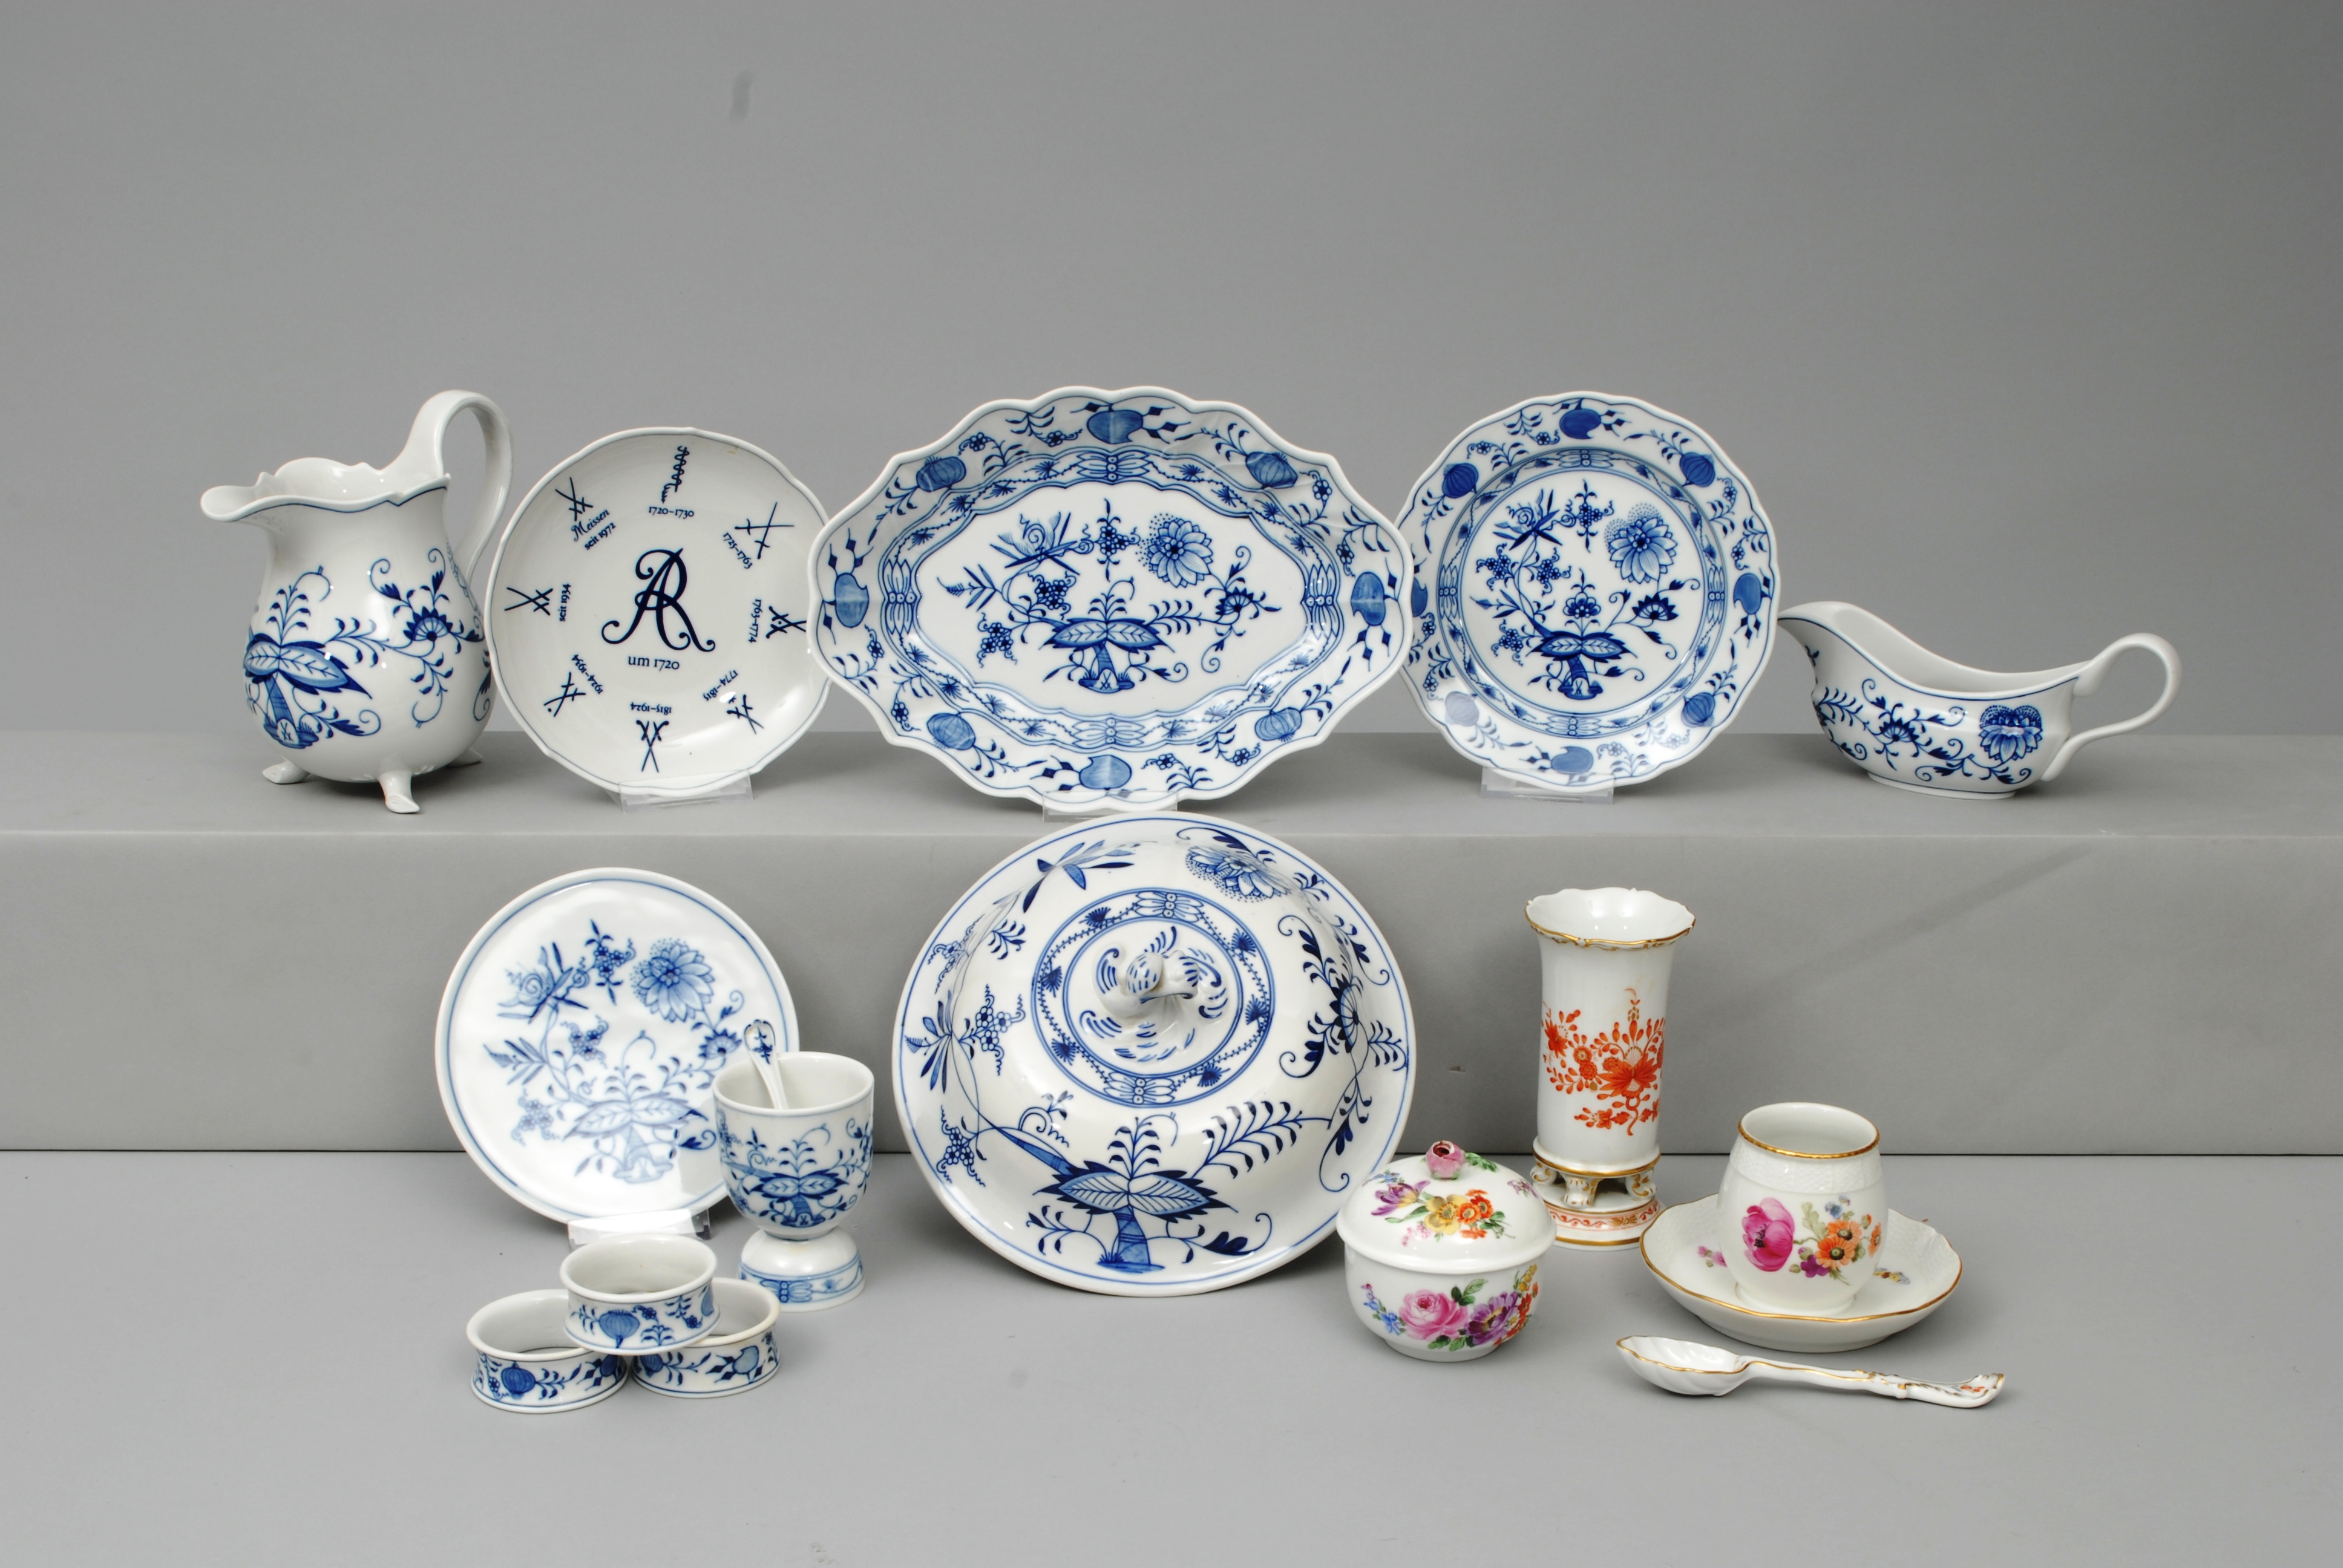 A convolute of table ware "Onion pattern" and "Flowers"